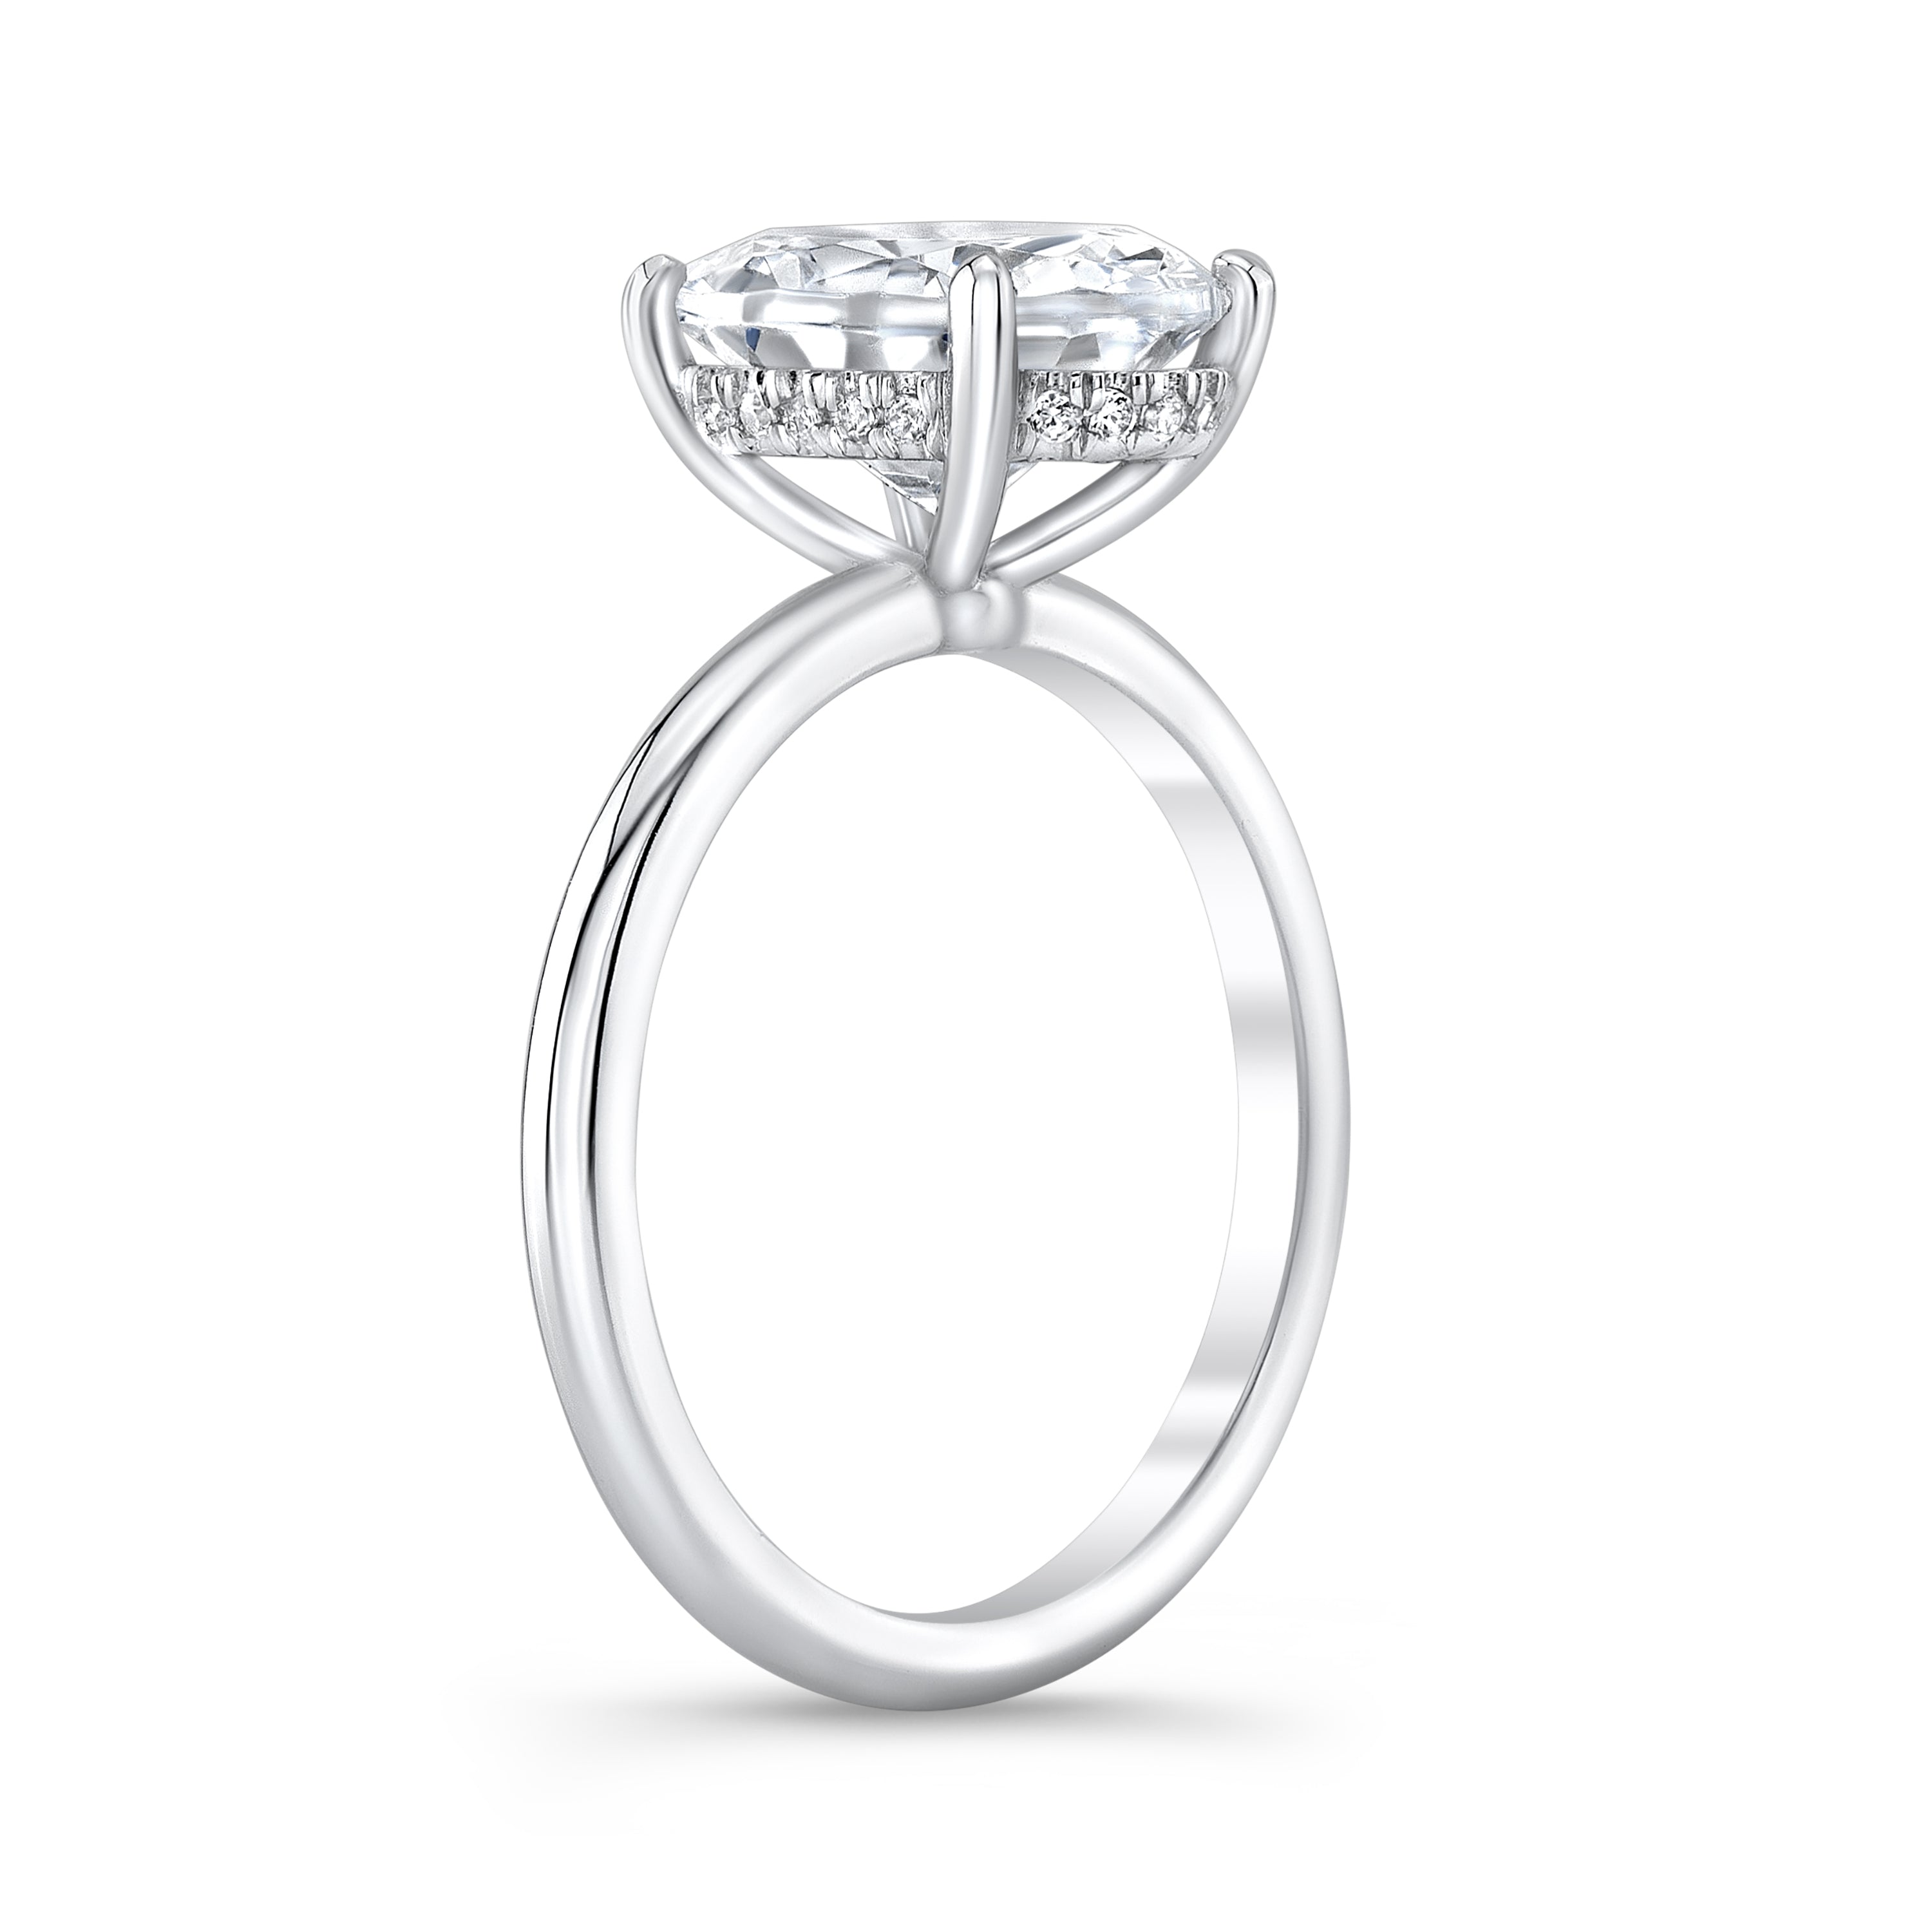 Orion Solitaire Engagement Ring